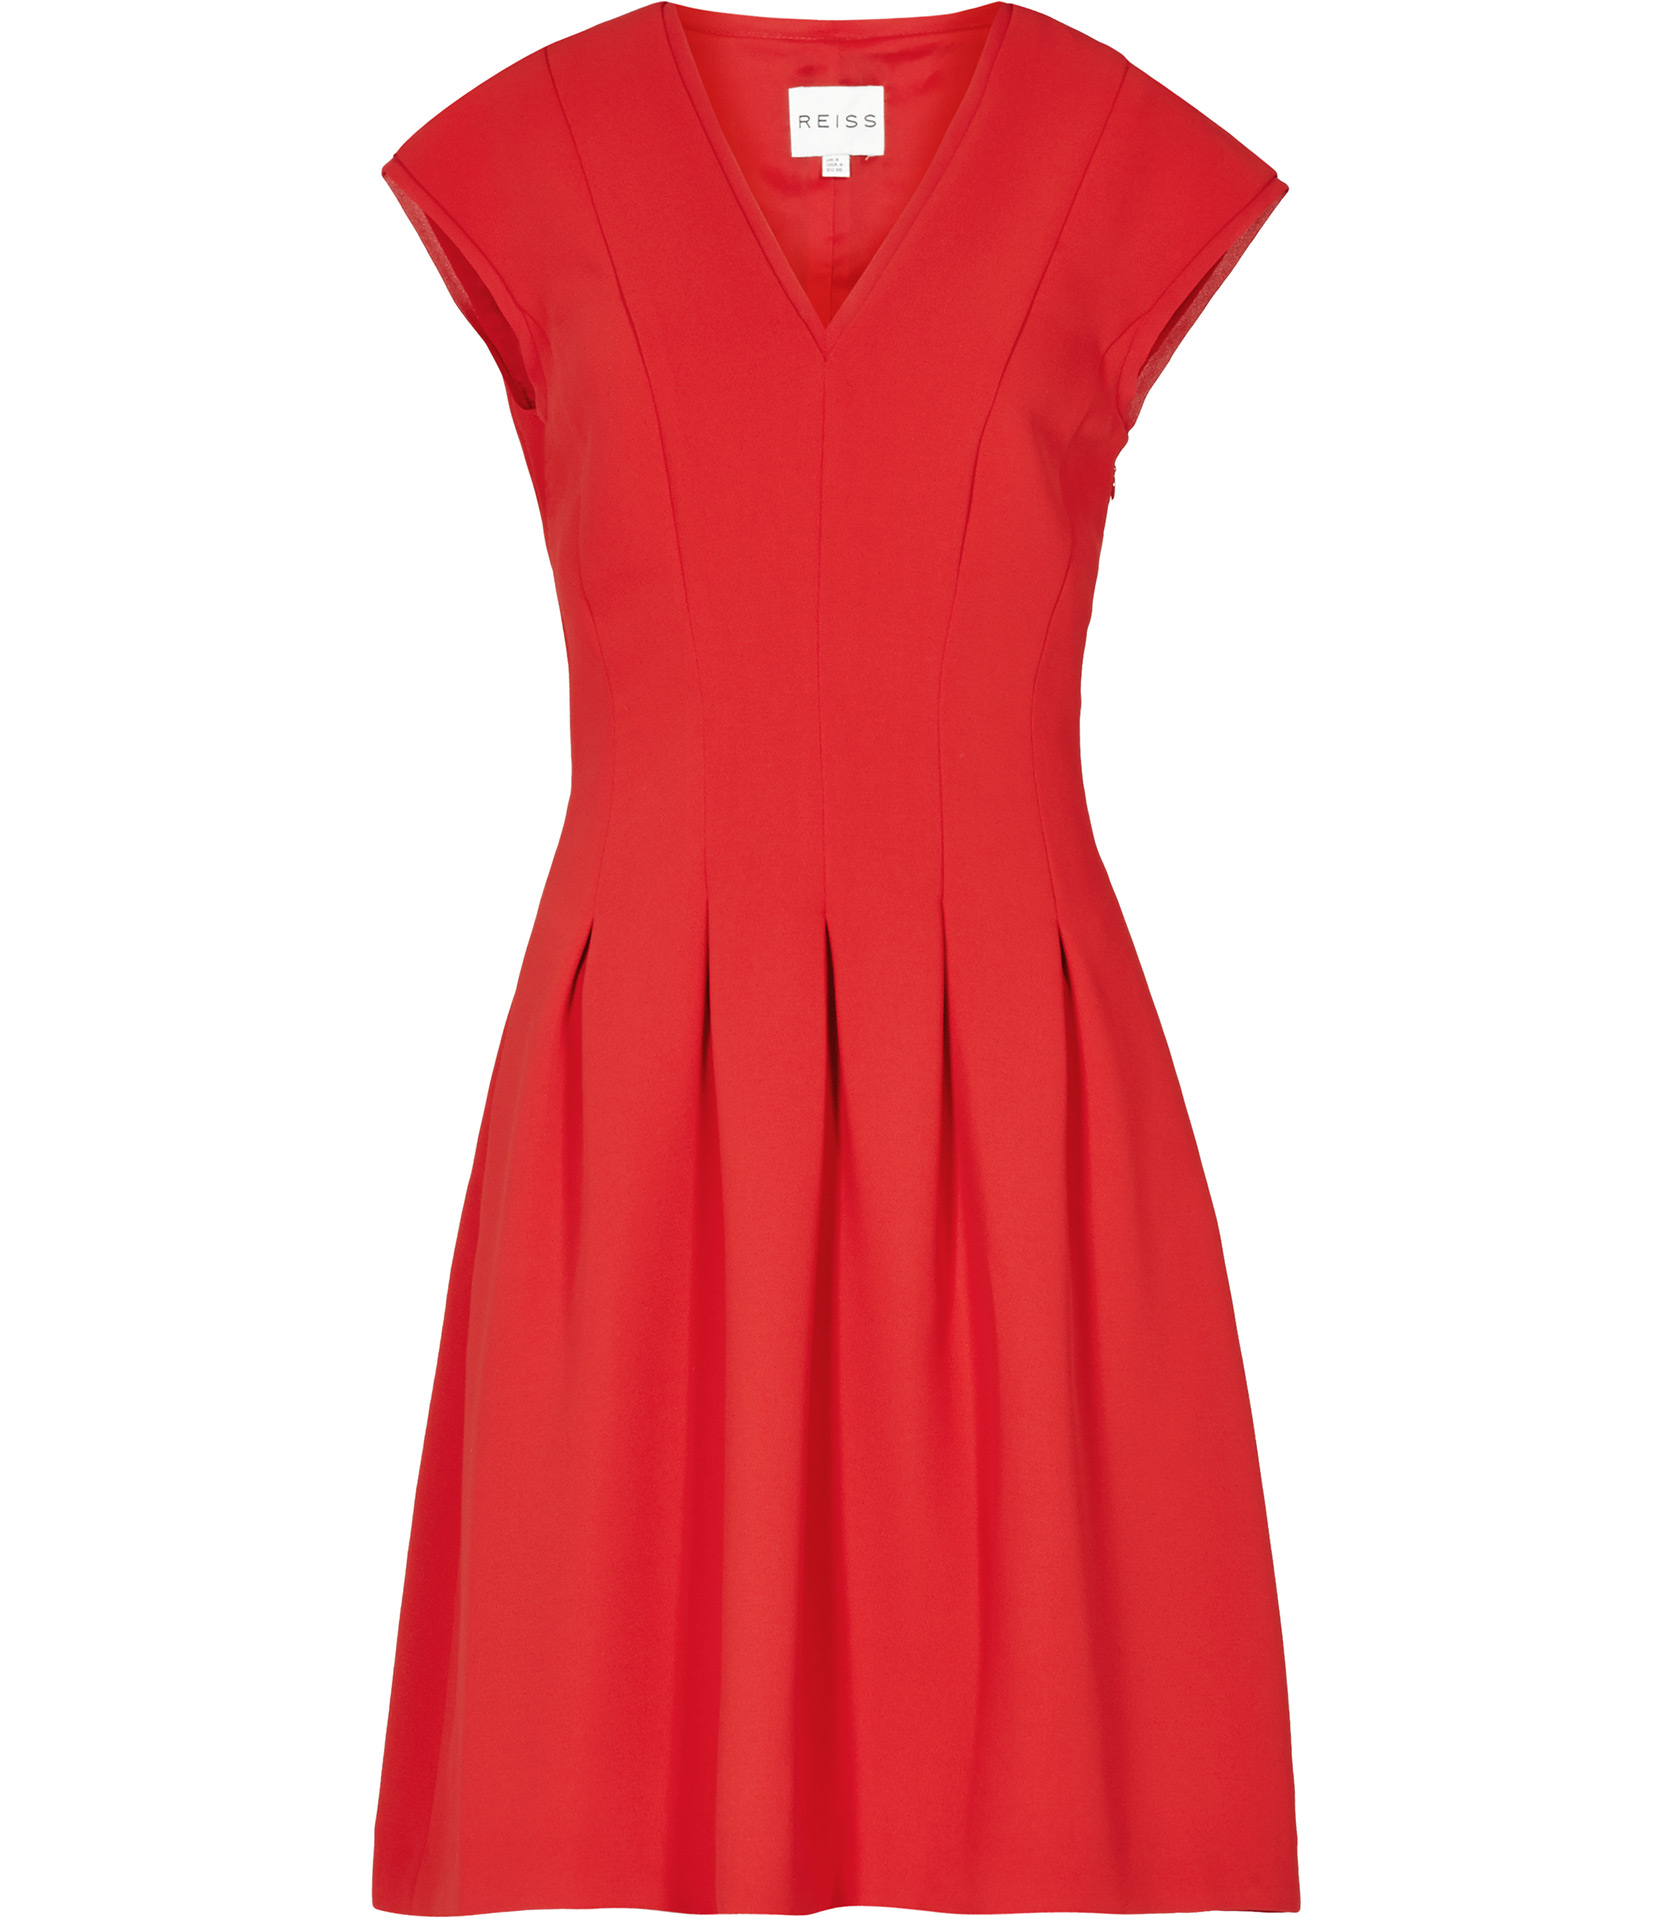 Lyst - Reiss Lizzie Pleat Fit and Flare Dress in Red